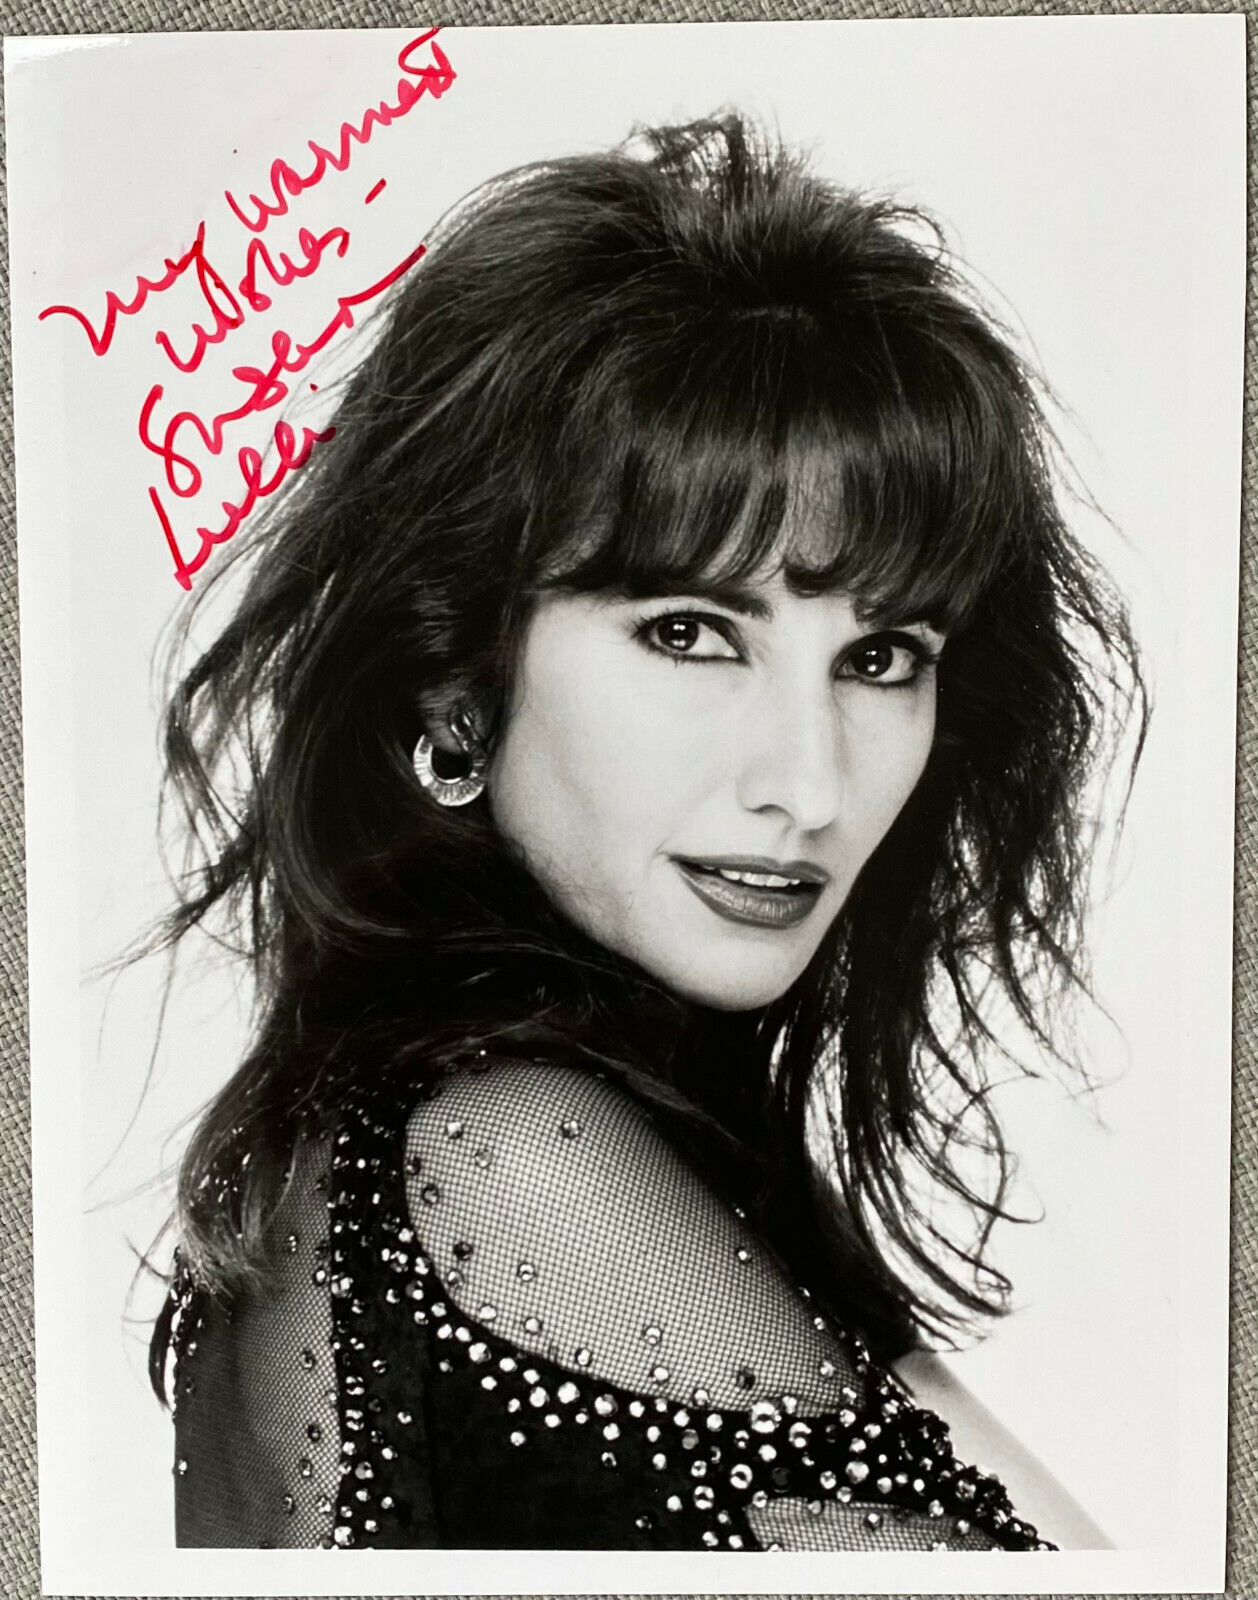 Susan Lucci Signed IP 7x9 B&W Photo Poster painting - Authentic, All My Children, Erica Kane